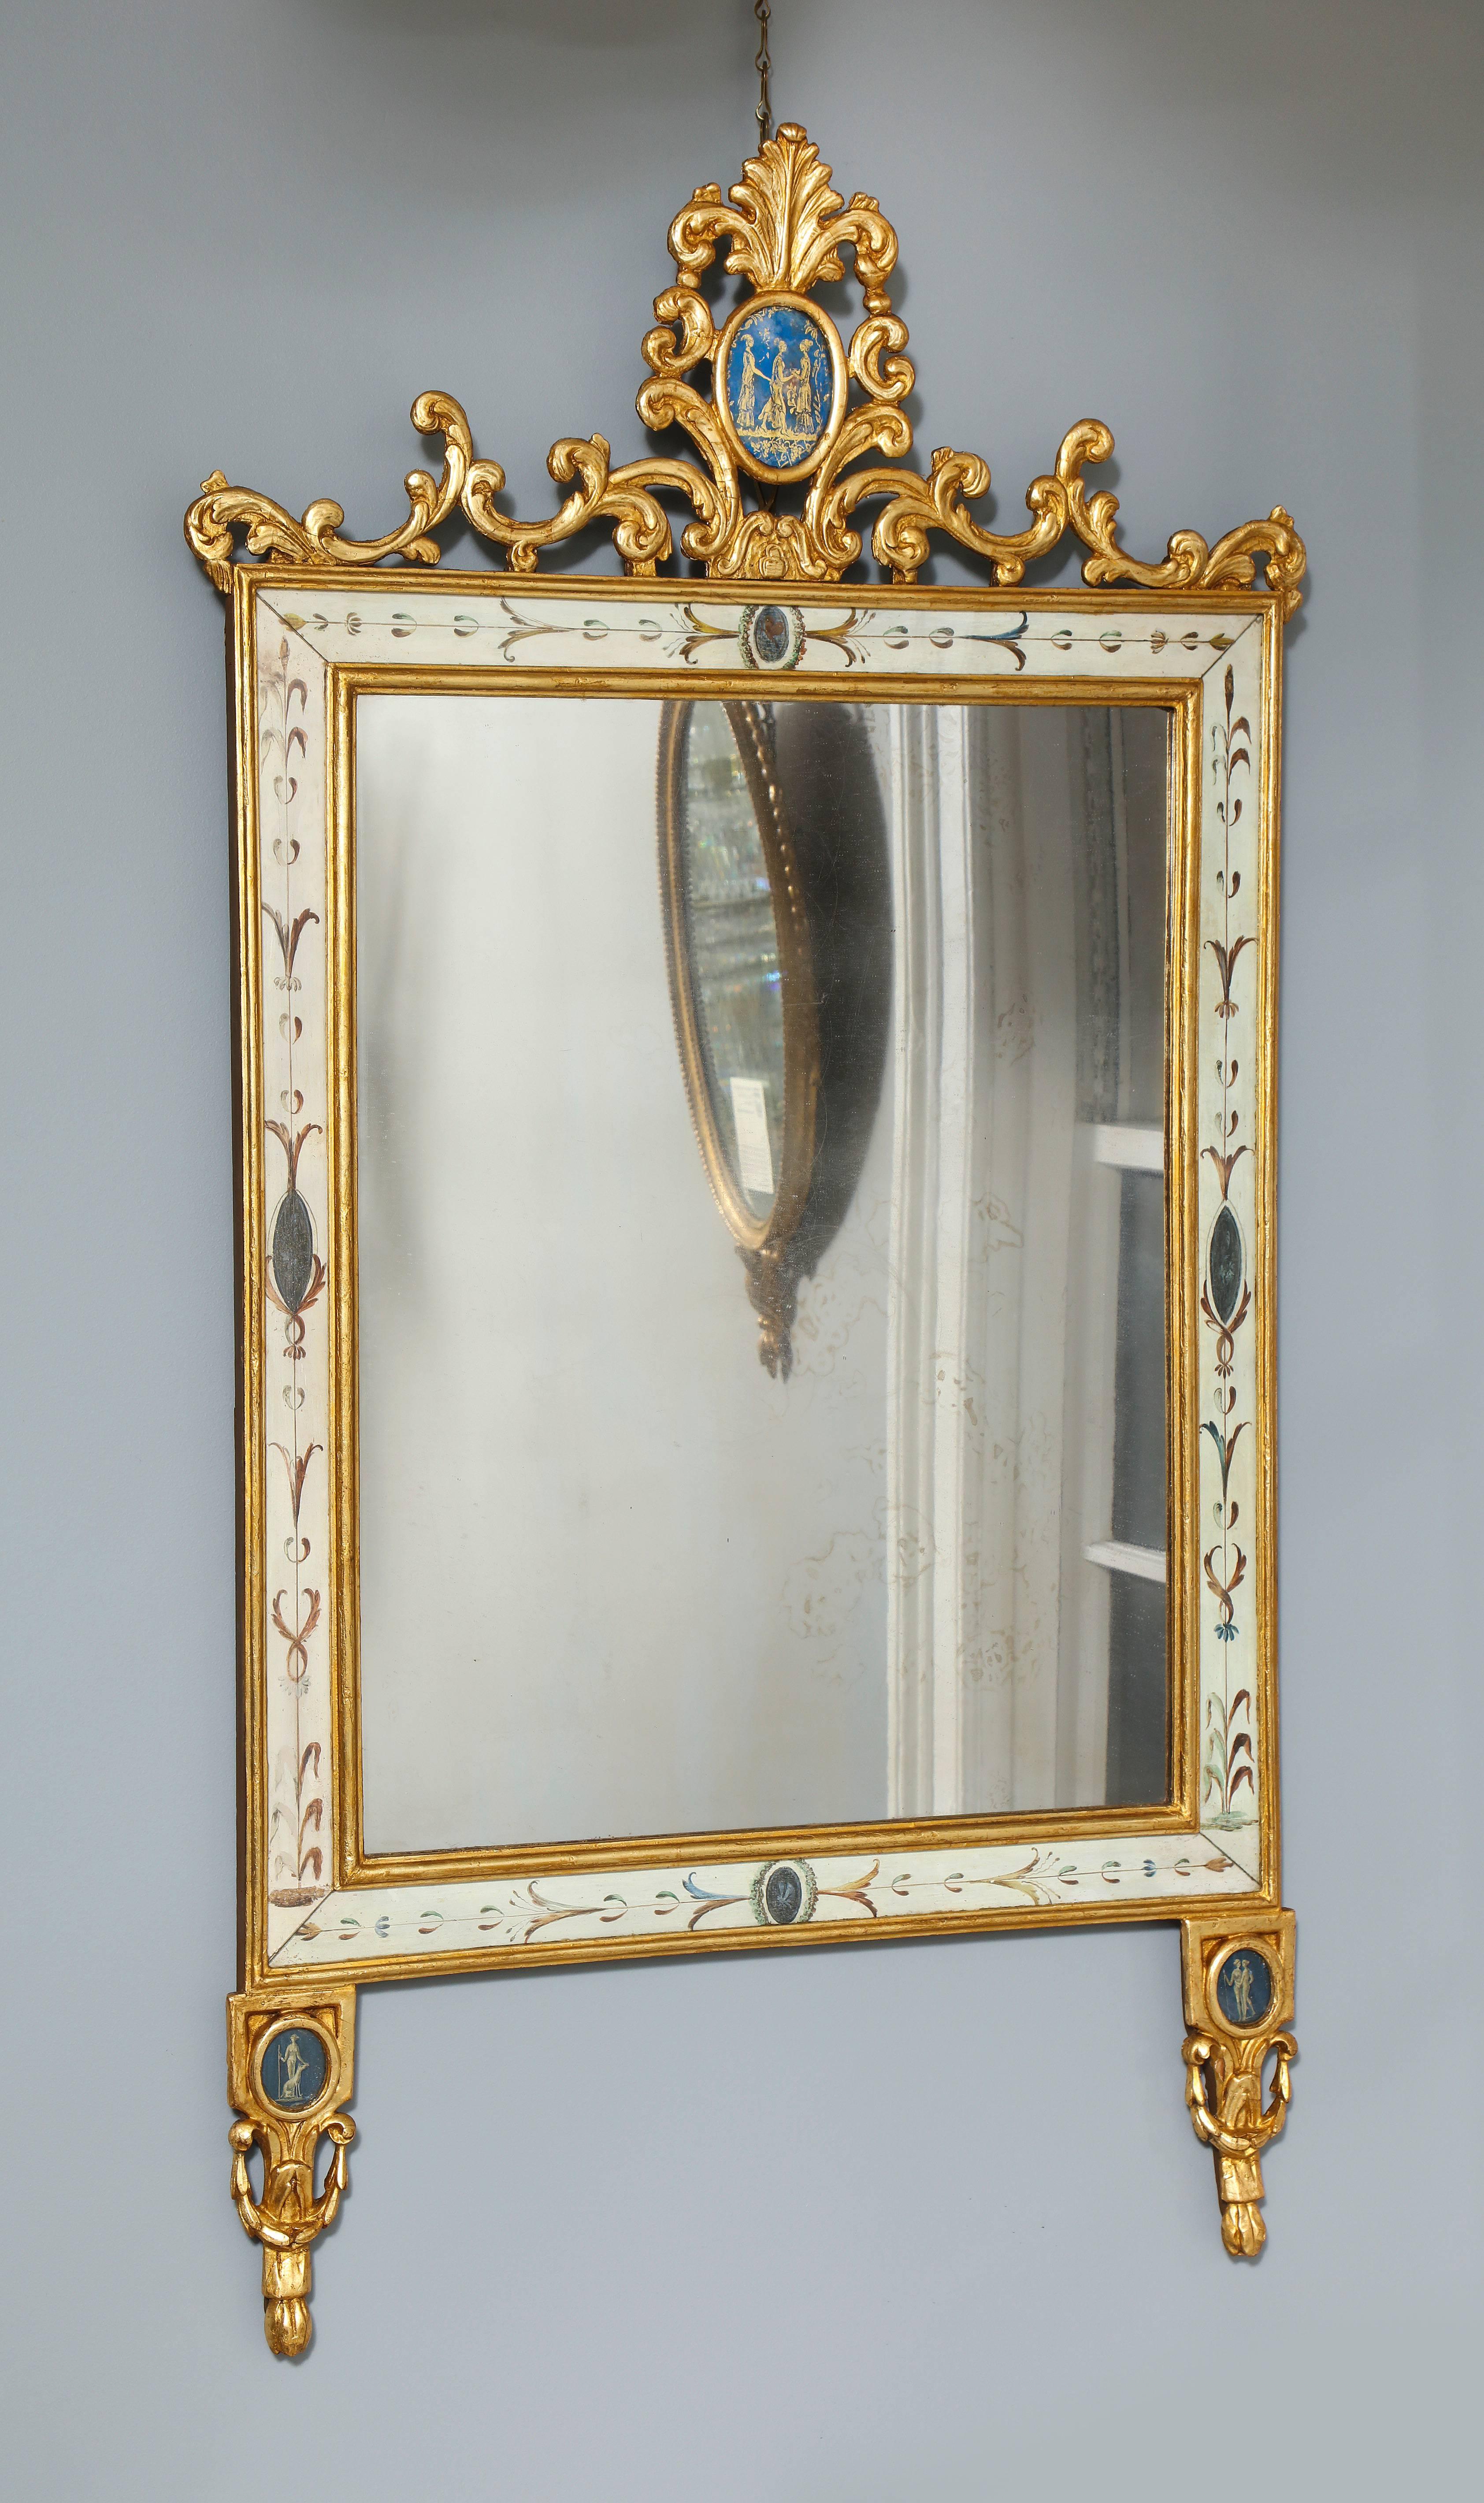 Fine Italian Neoclassical Painted and Parcel Giltwood Mirror, having a scrolling leaf carved and pierced gilt cresting with verre églomisé oval panel above a rectangular plate with a clear glass border surround, the frame painted in the “Pompeian”